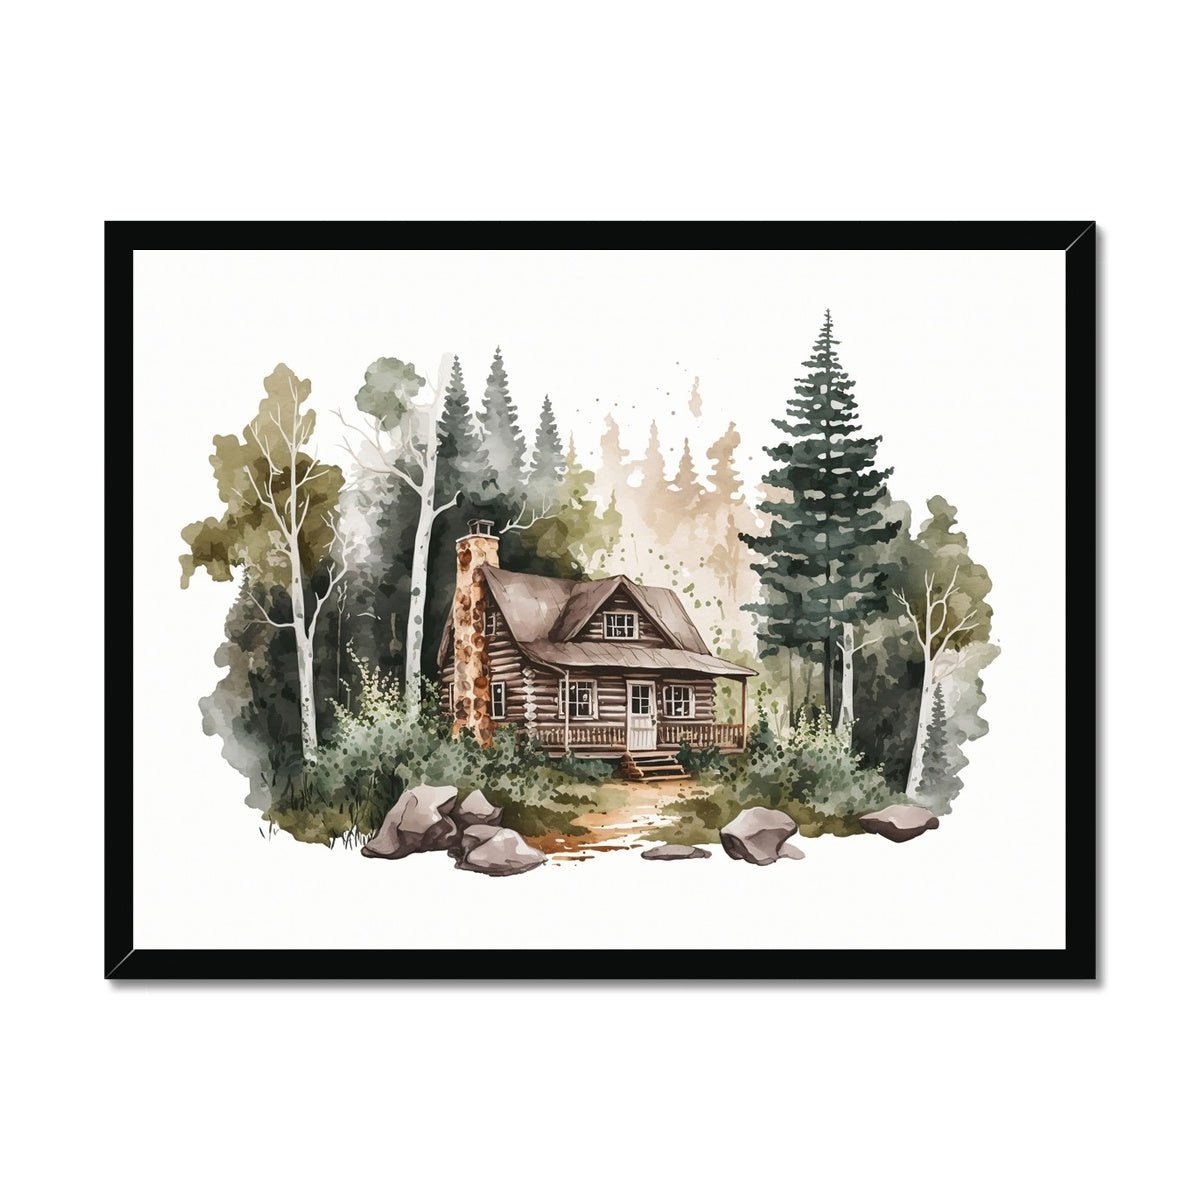 Nature's Serenity - Cozy Forest 2 1 - Landscapes Poster Print by doingly